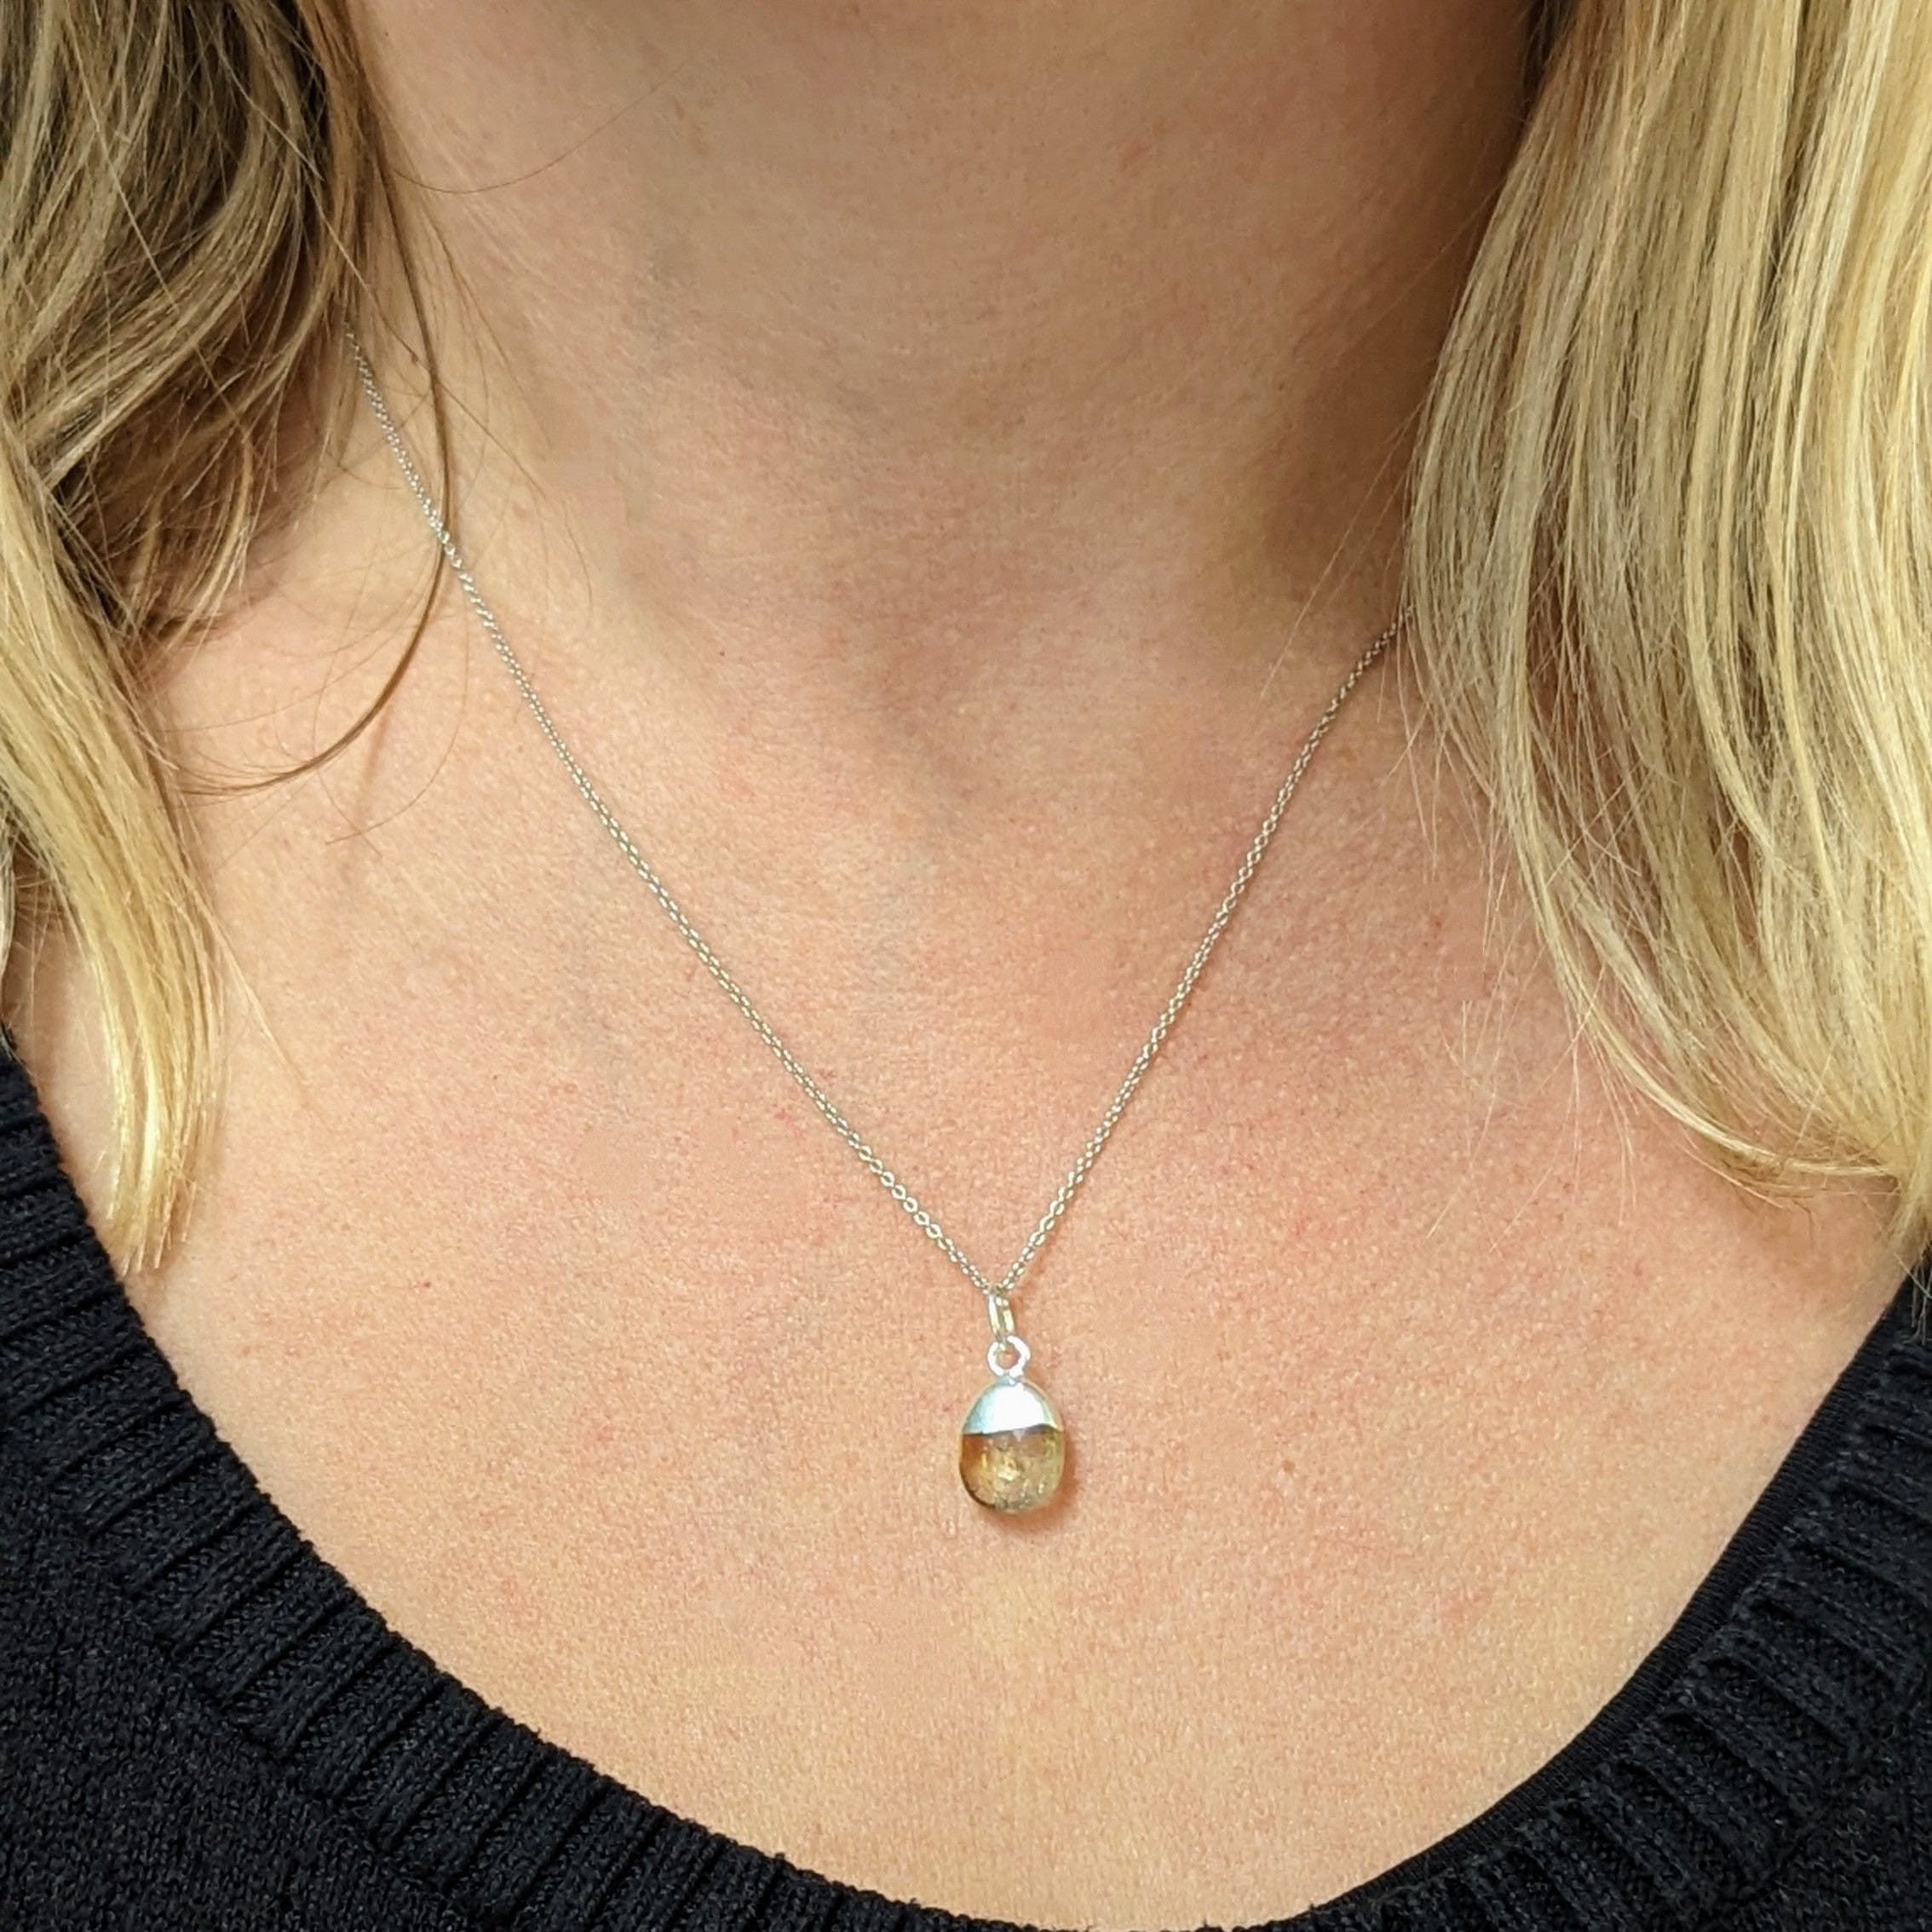 Smooth Tumbled Citrine Pendant Necklace